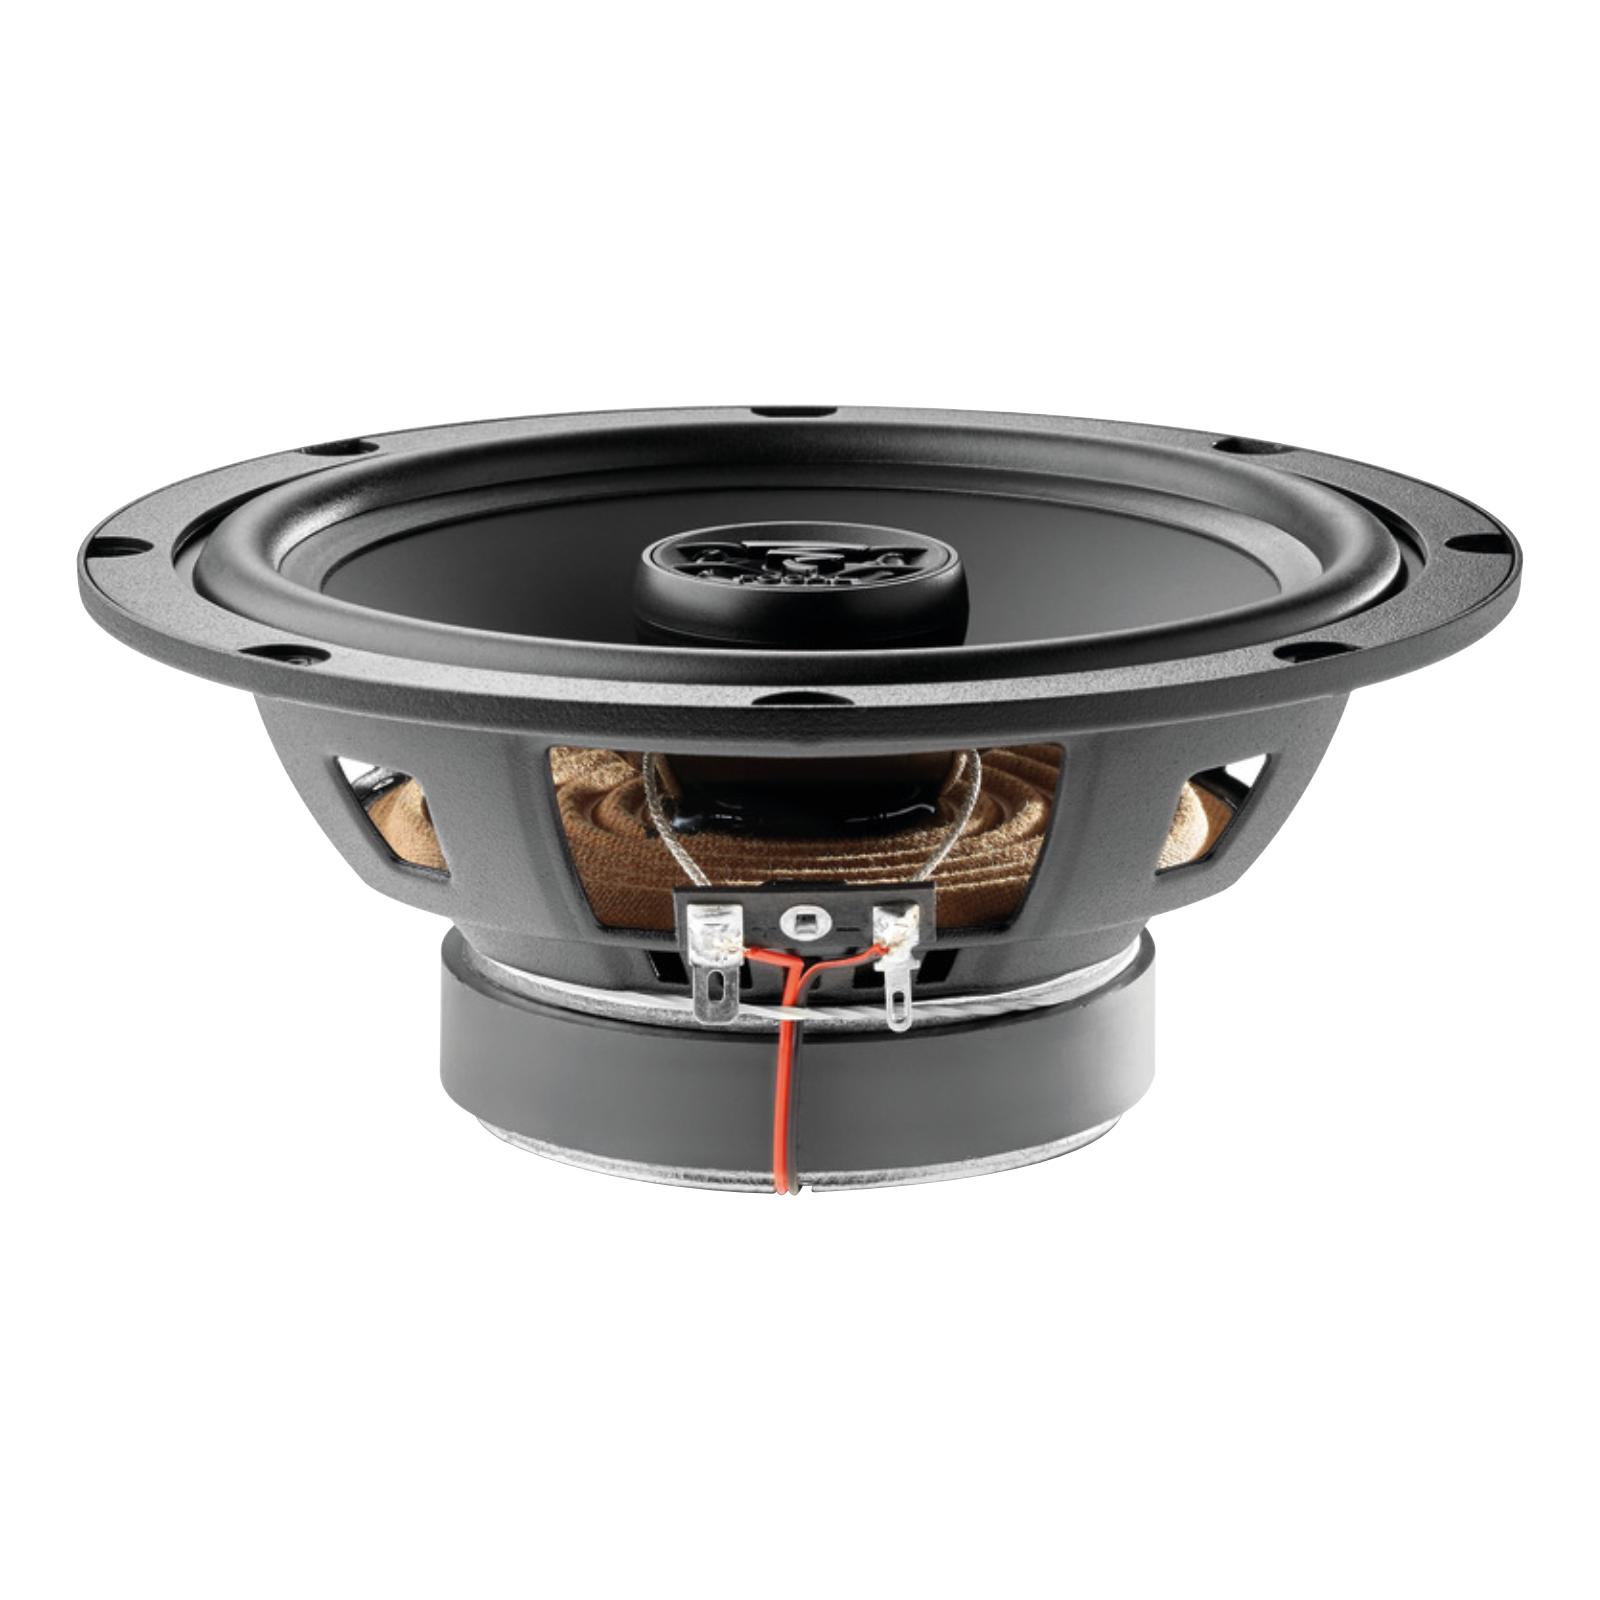 Focal ACX 165 Auditor Series budget car speakers